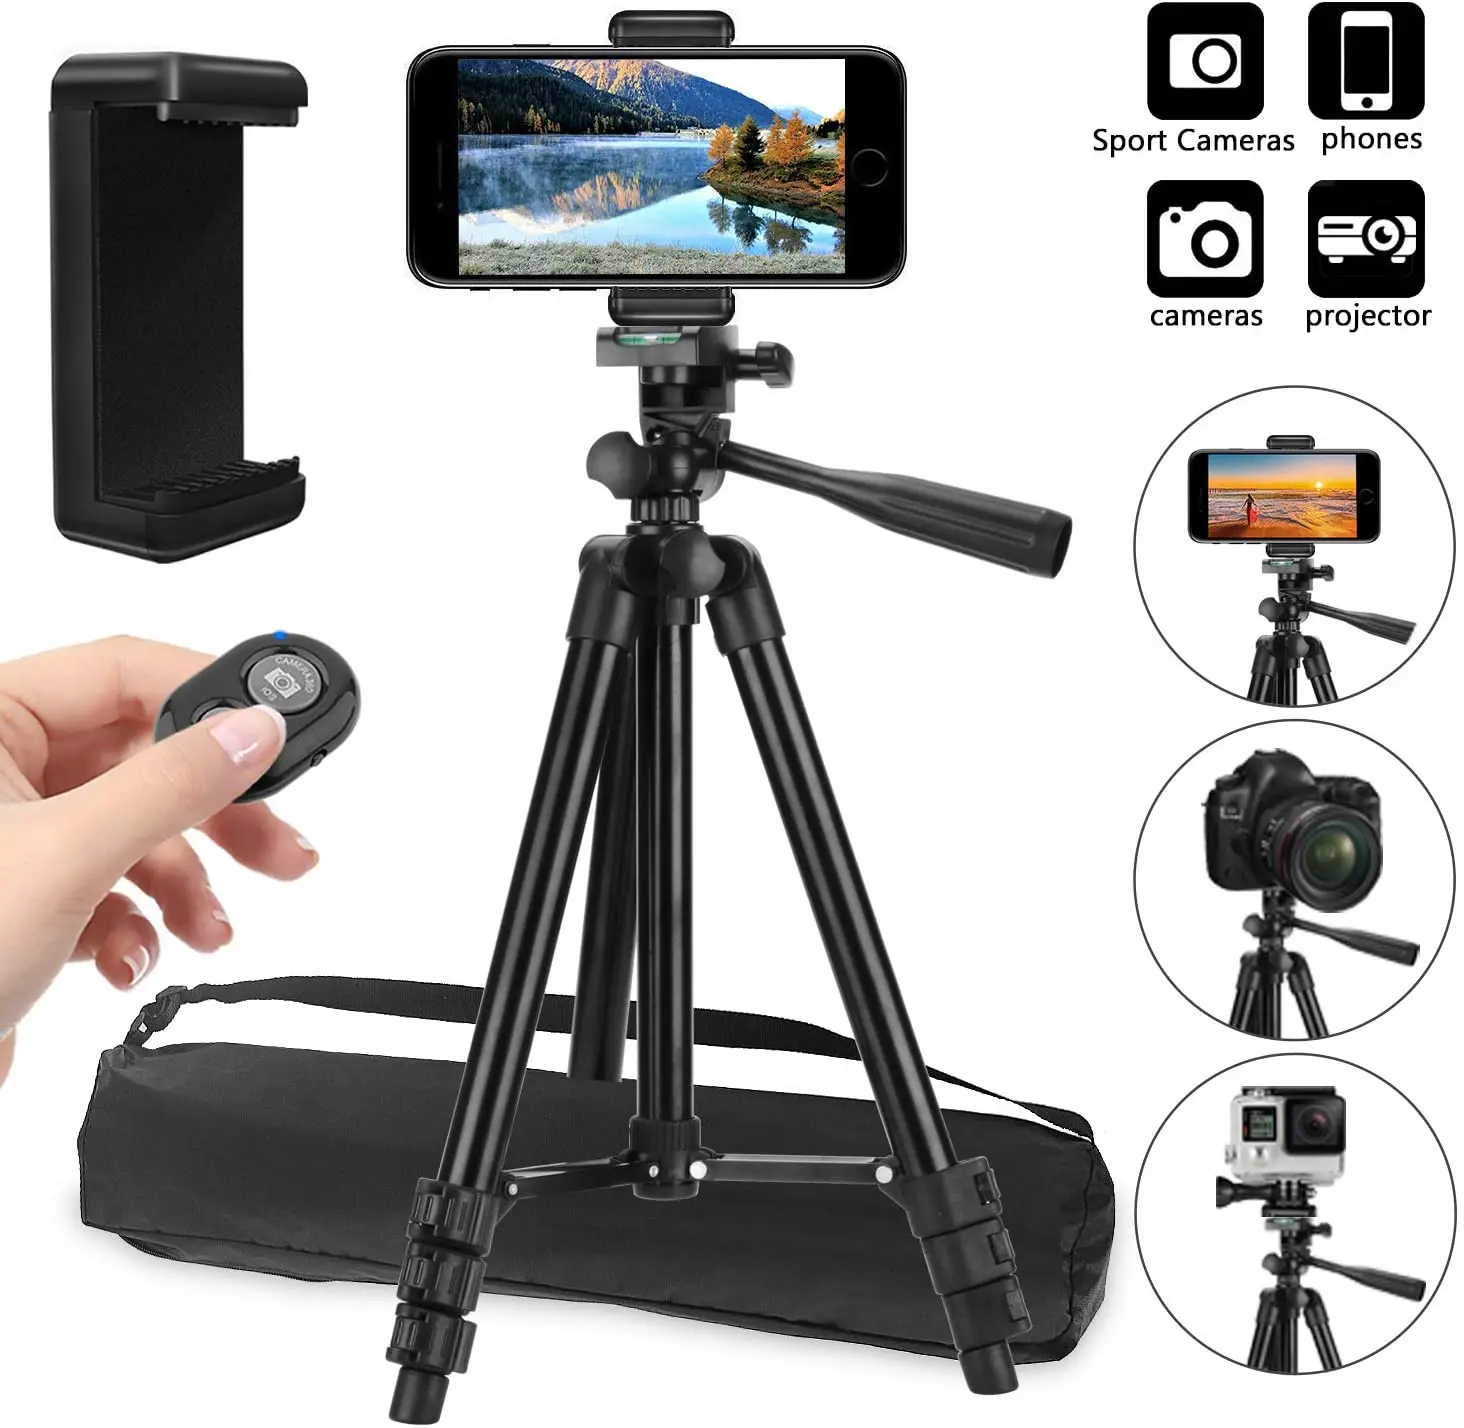 

Shemax Camera Tripod DSLR Stand, Phone Holder Tripod, Compact Light Video Vlog Blogging Stand with Quick Plate 360 Panorama